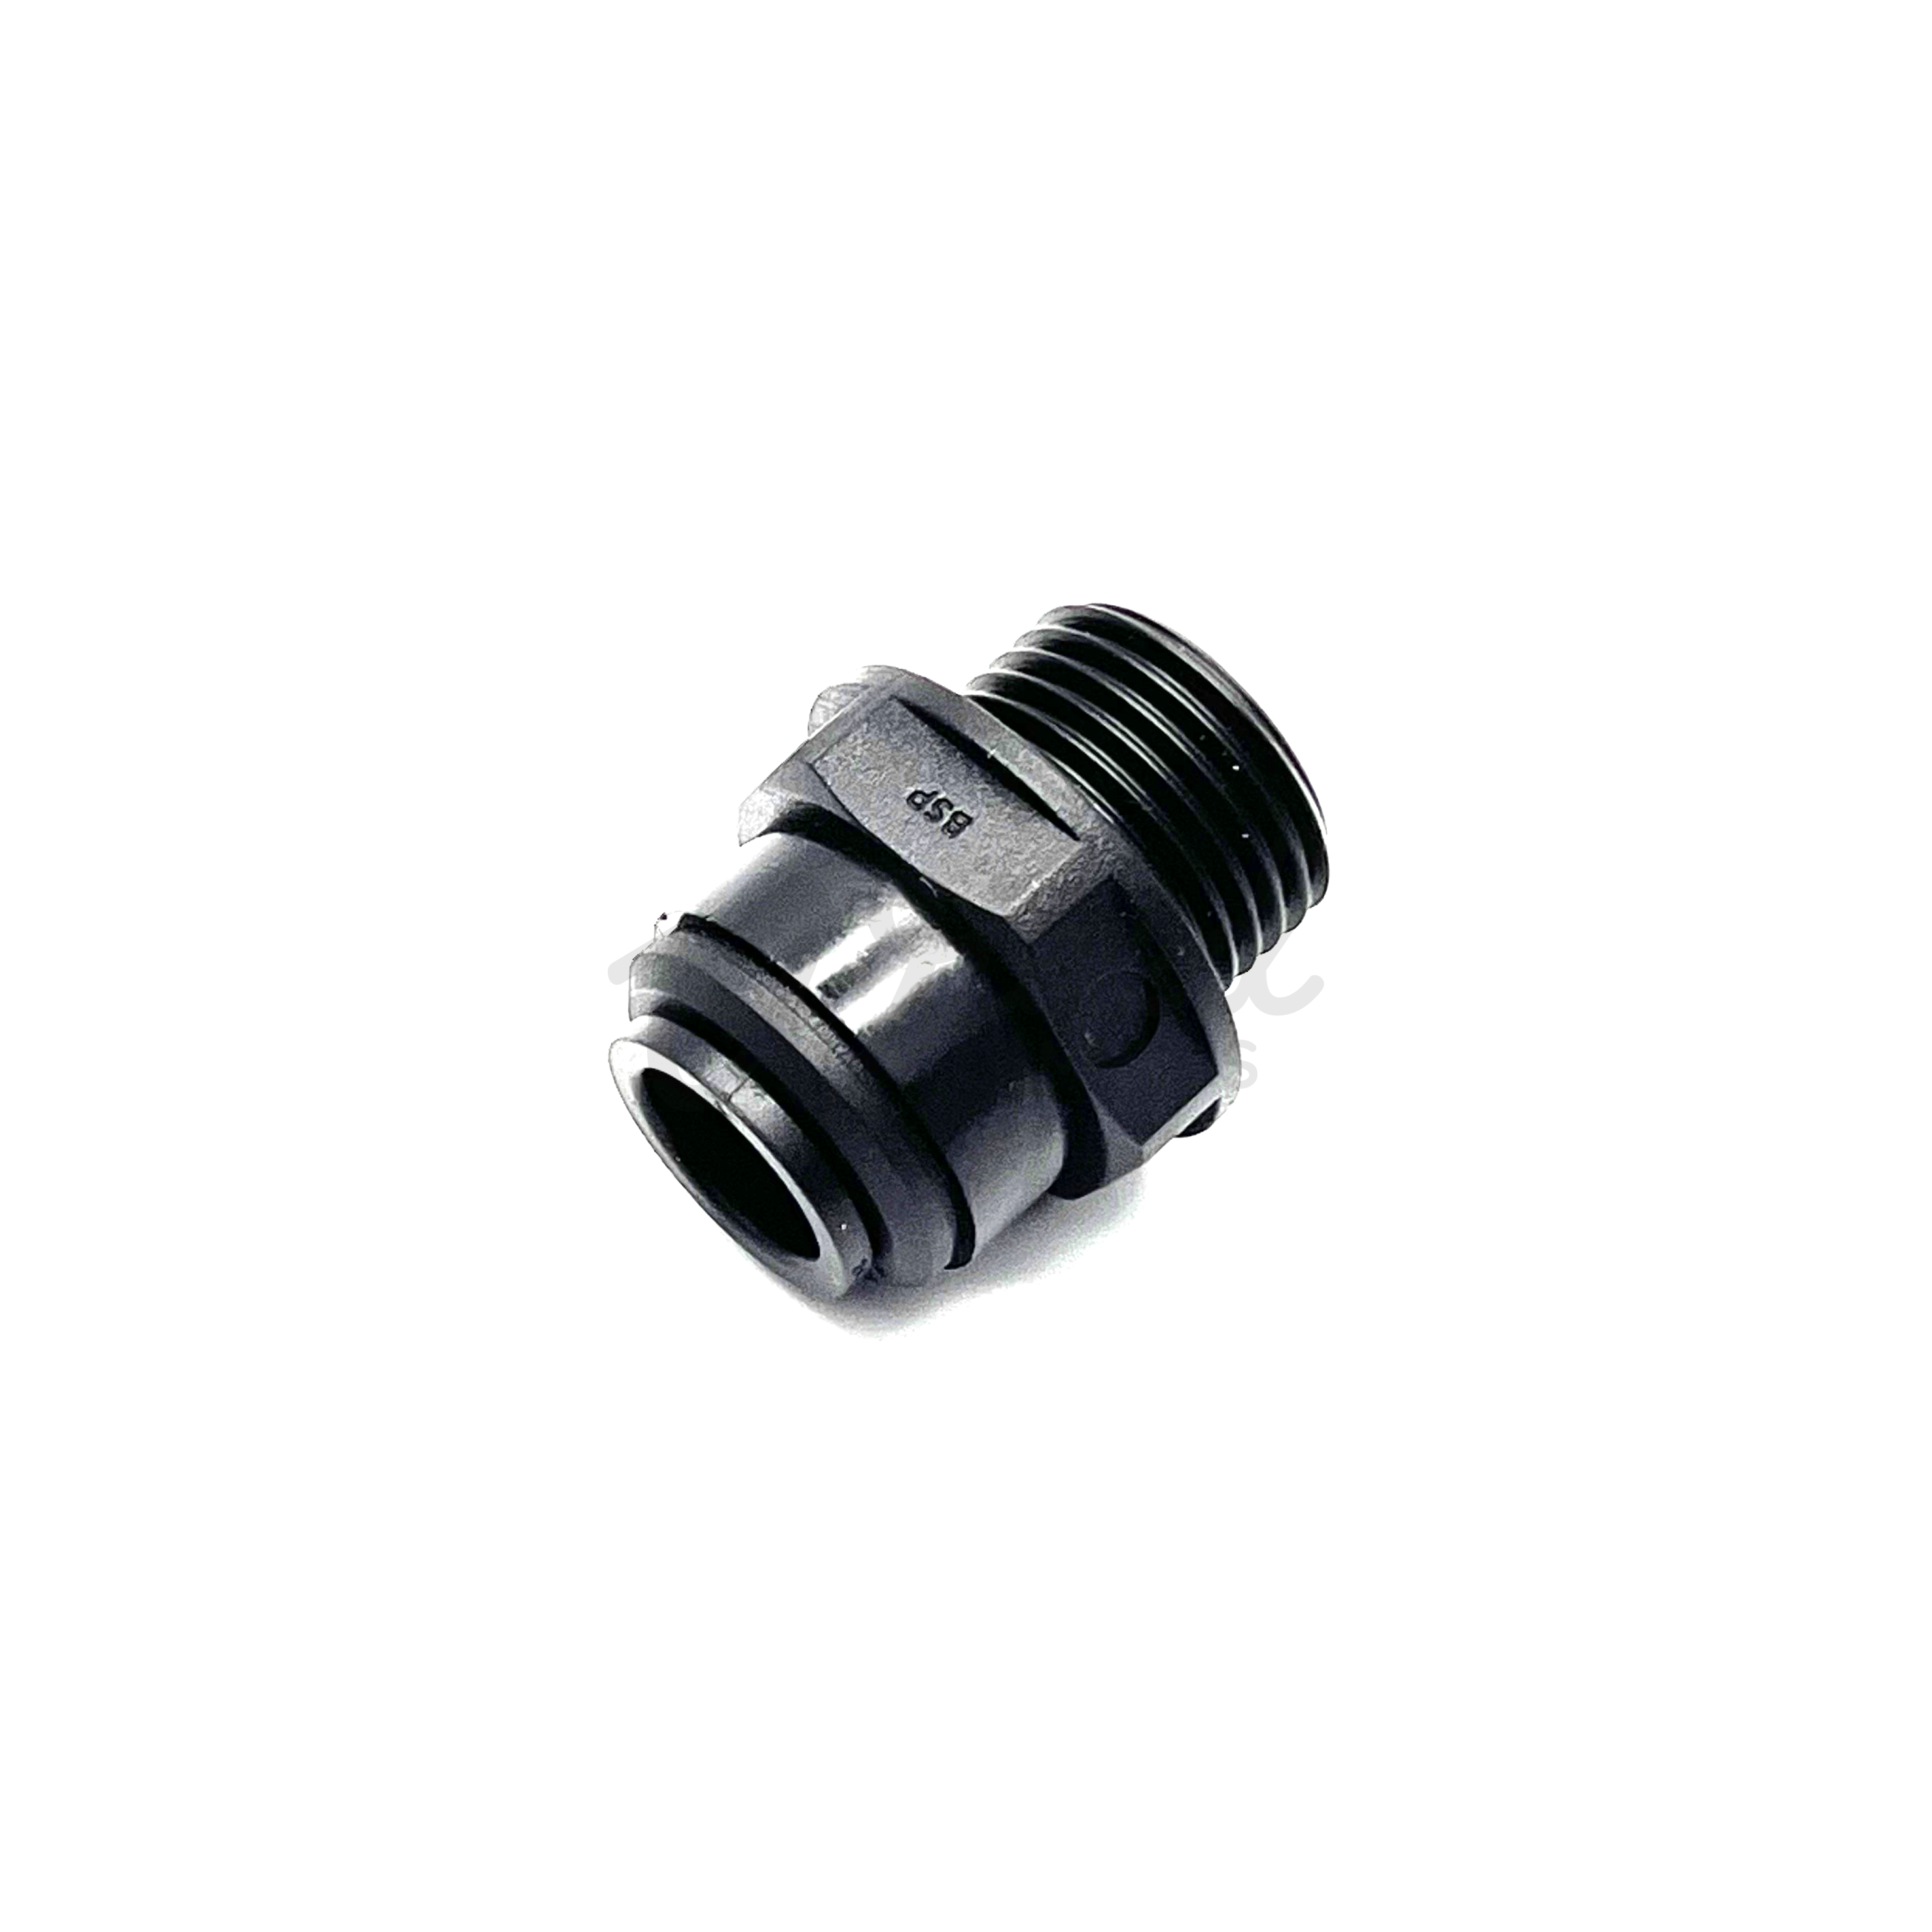 Wired Campers Limited John Guest 12MM Speedfit JG Push-Fit - 1/2" BSP Male To 12MM Adapter